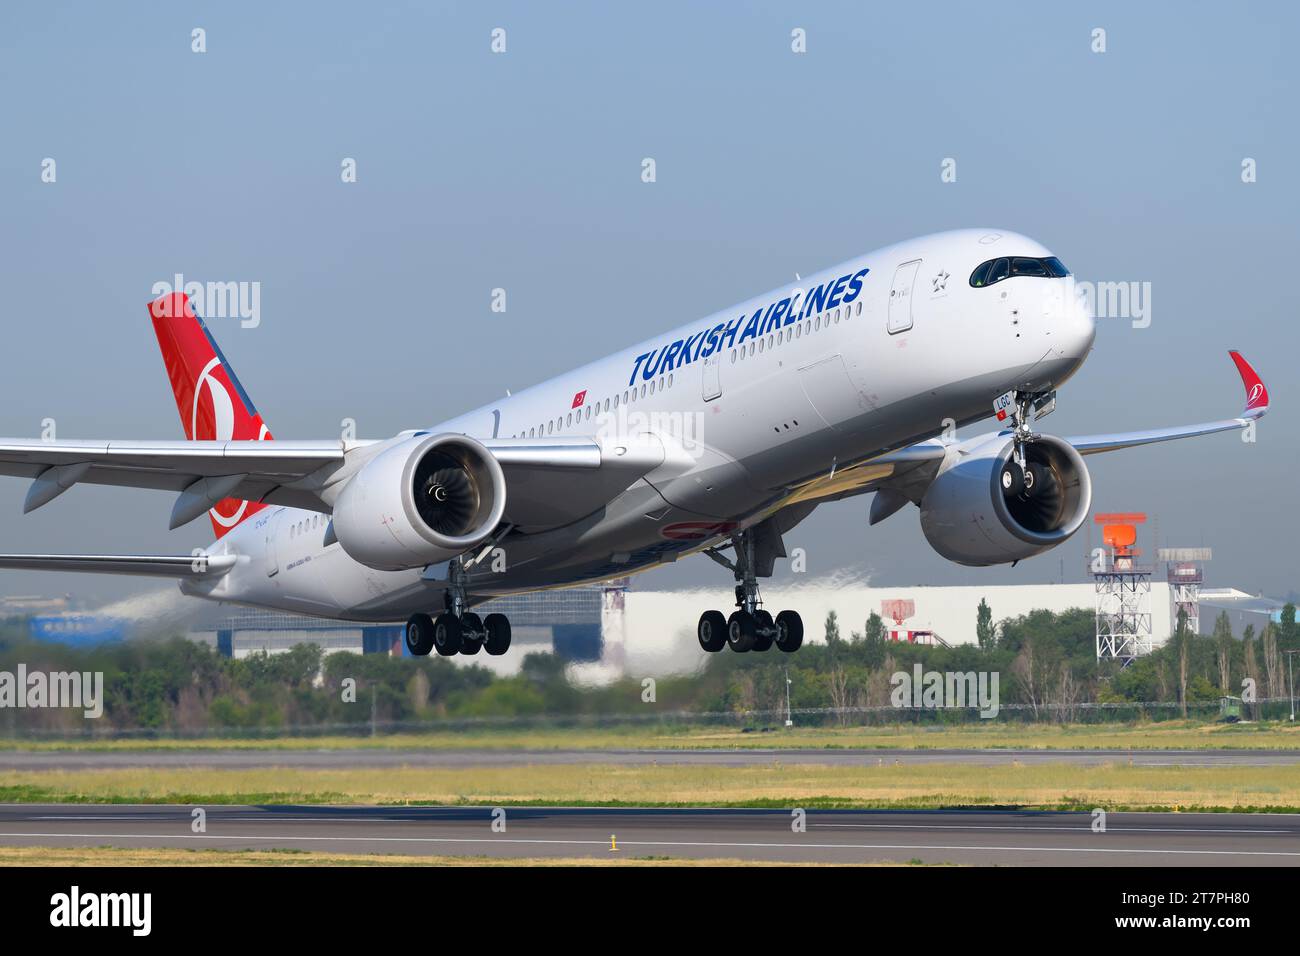 Turkish Airlines Airbus A350-900 decolla. Aereo A350-900XWB di Turkish Airlines in partenza. Aereo A350 in volo. Foto Stock